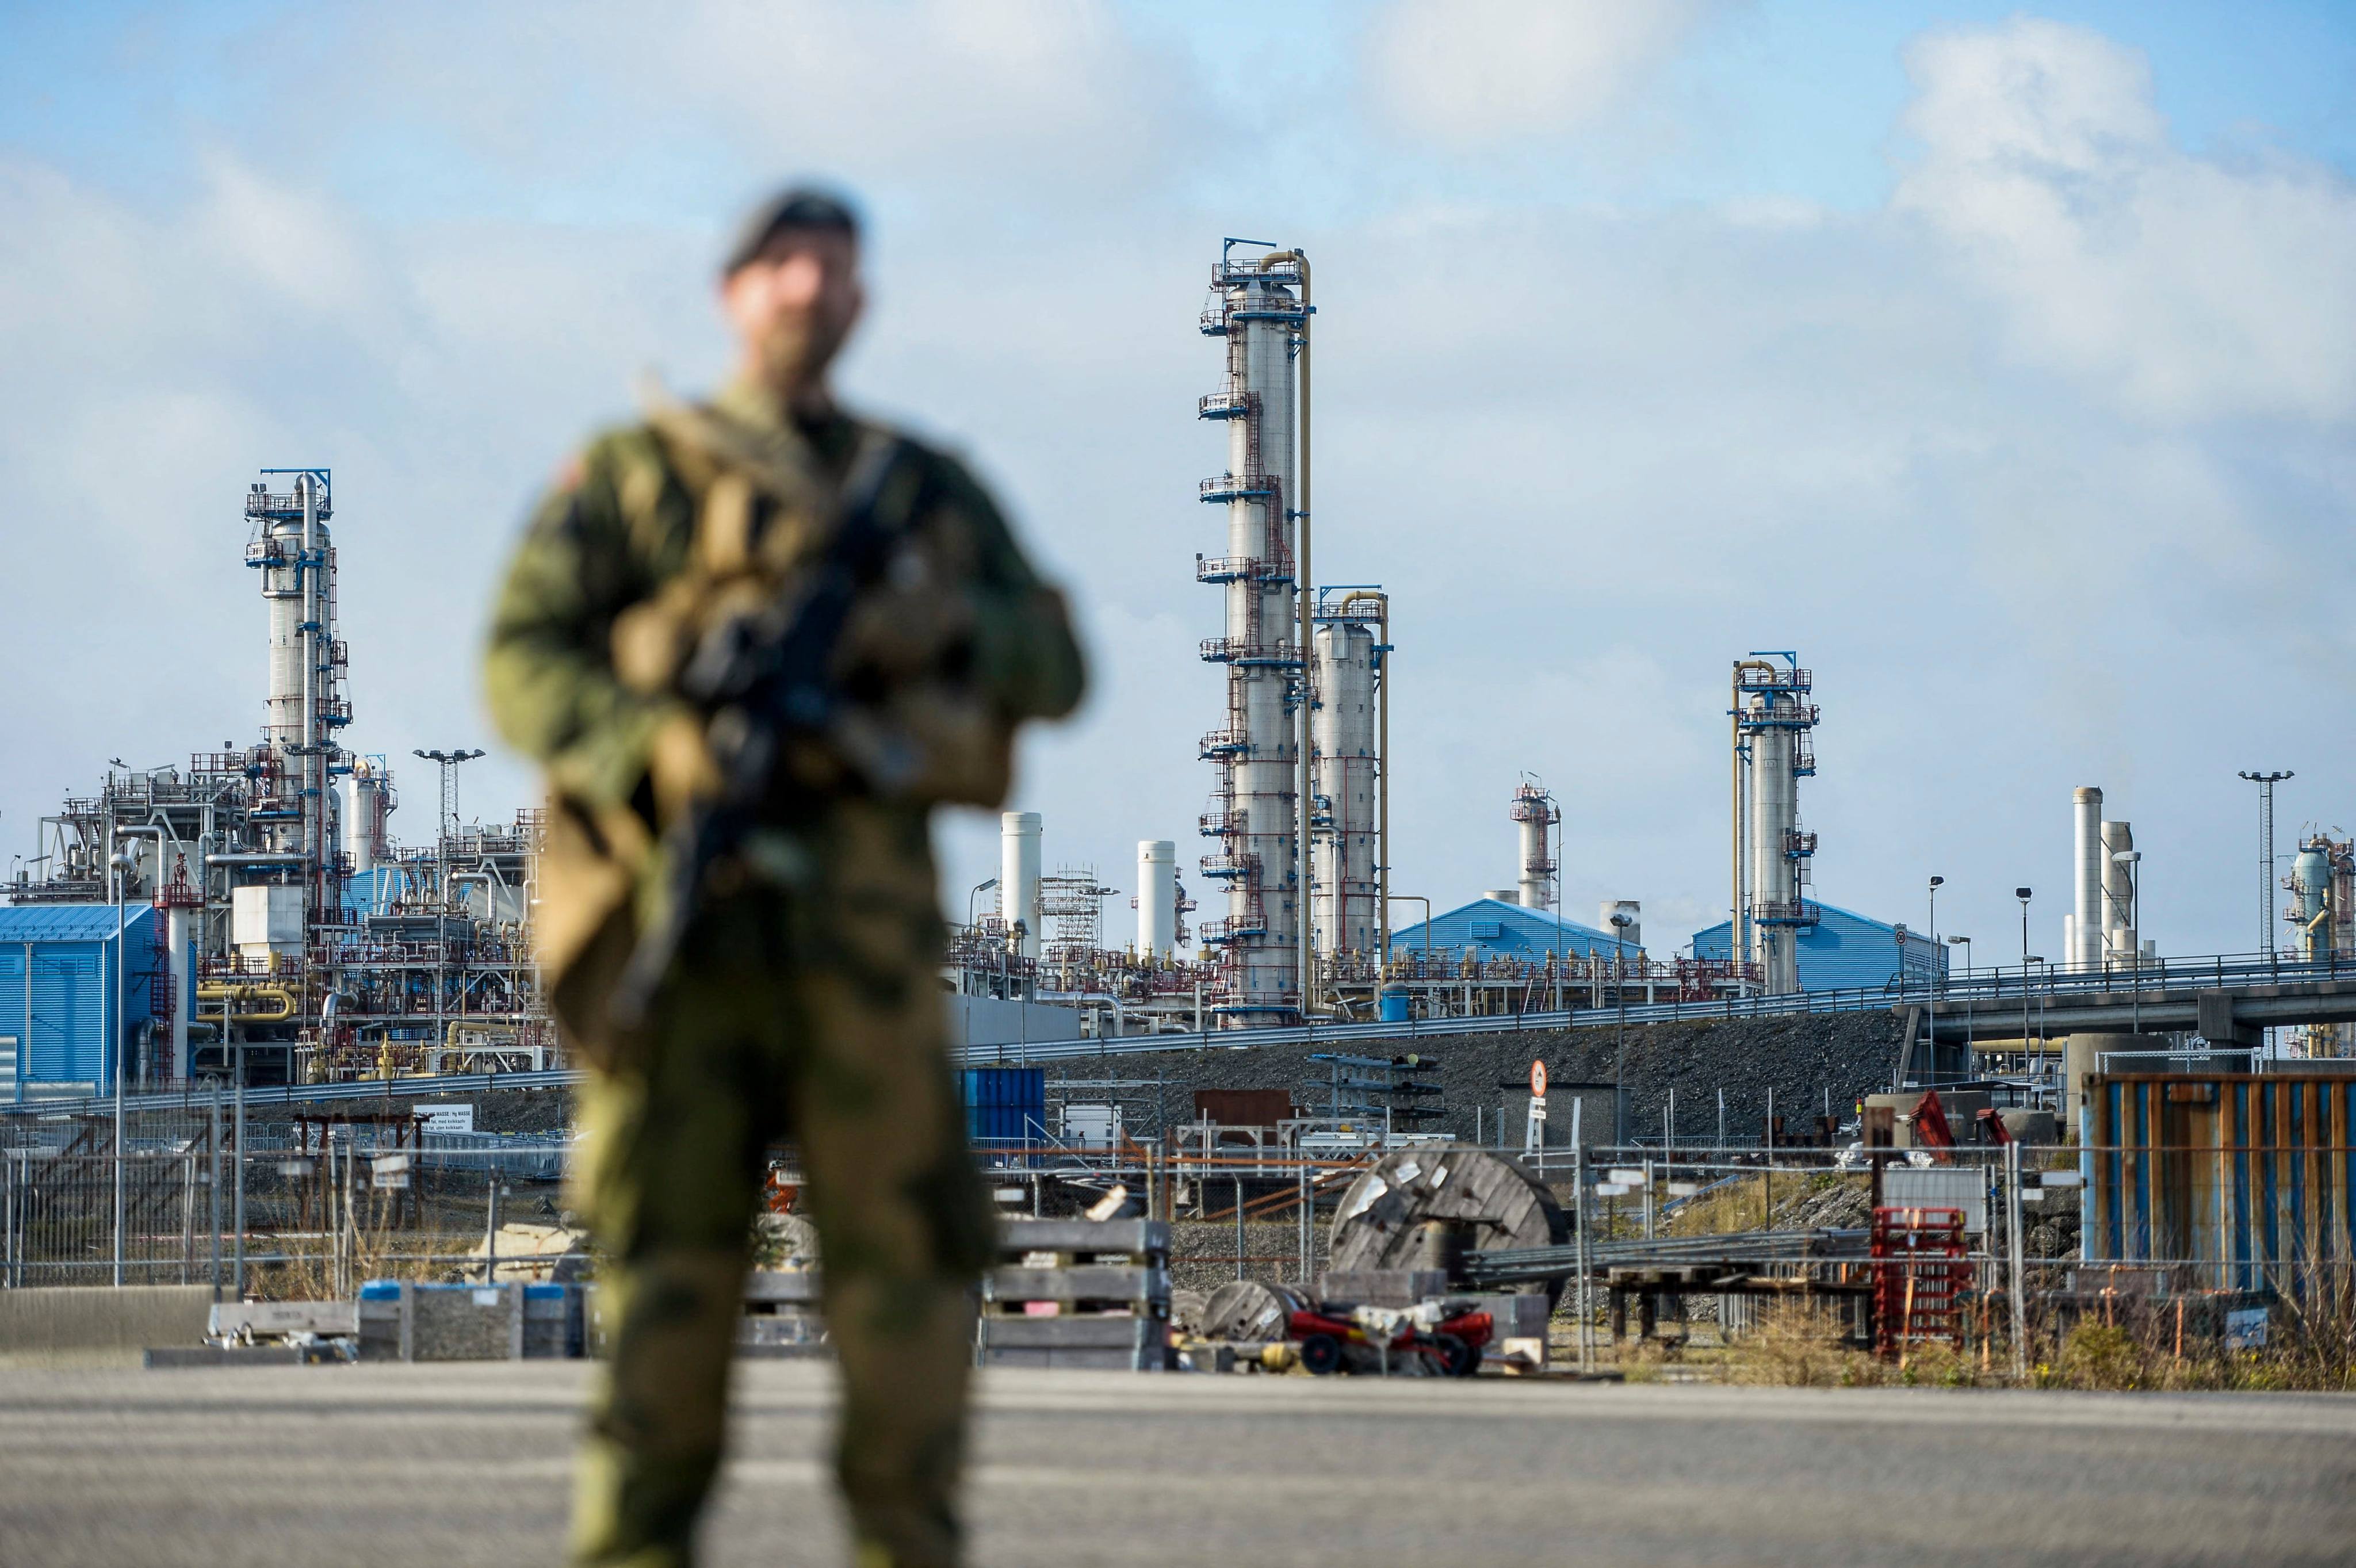 A Norwegian Home Guard soldier stands guard at the Karst gas processing plant in Rogaland, Norway, on October 3. Norway, now the biggest supplier of gas to Europe, has increased security around its oil installations following allegations of sabotage on Nord Stream’s Baltic Sea pipelines. Photo: AFP